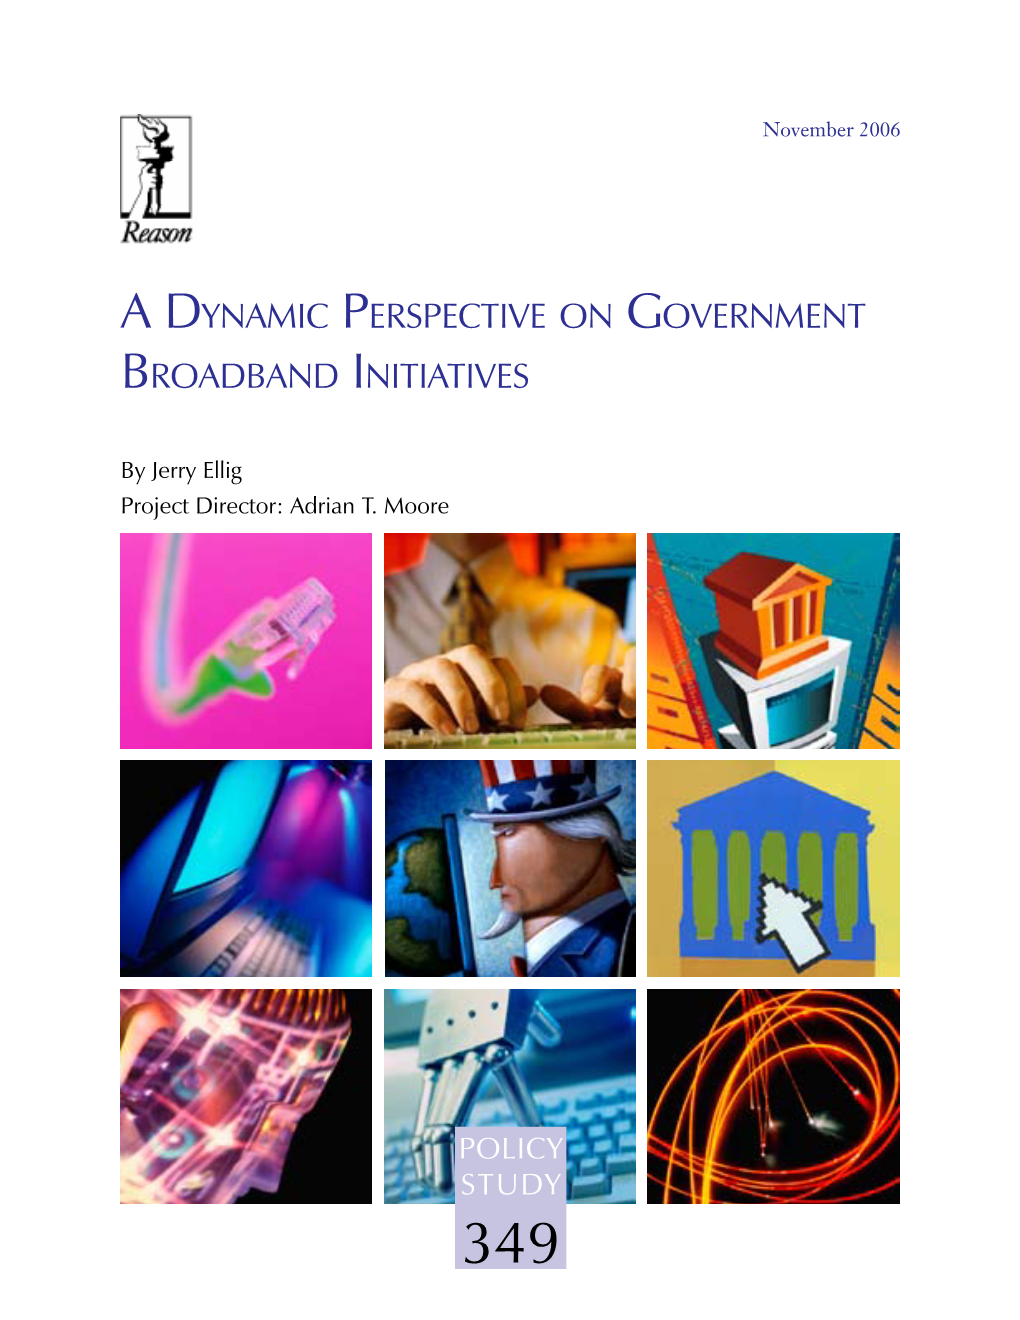 A Dynamic Perspective on Government Broadband Initiatives